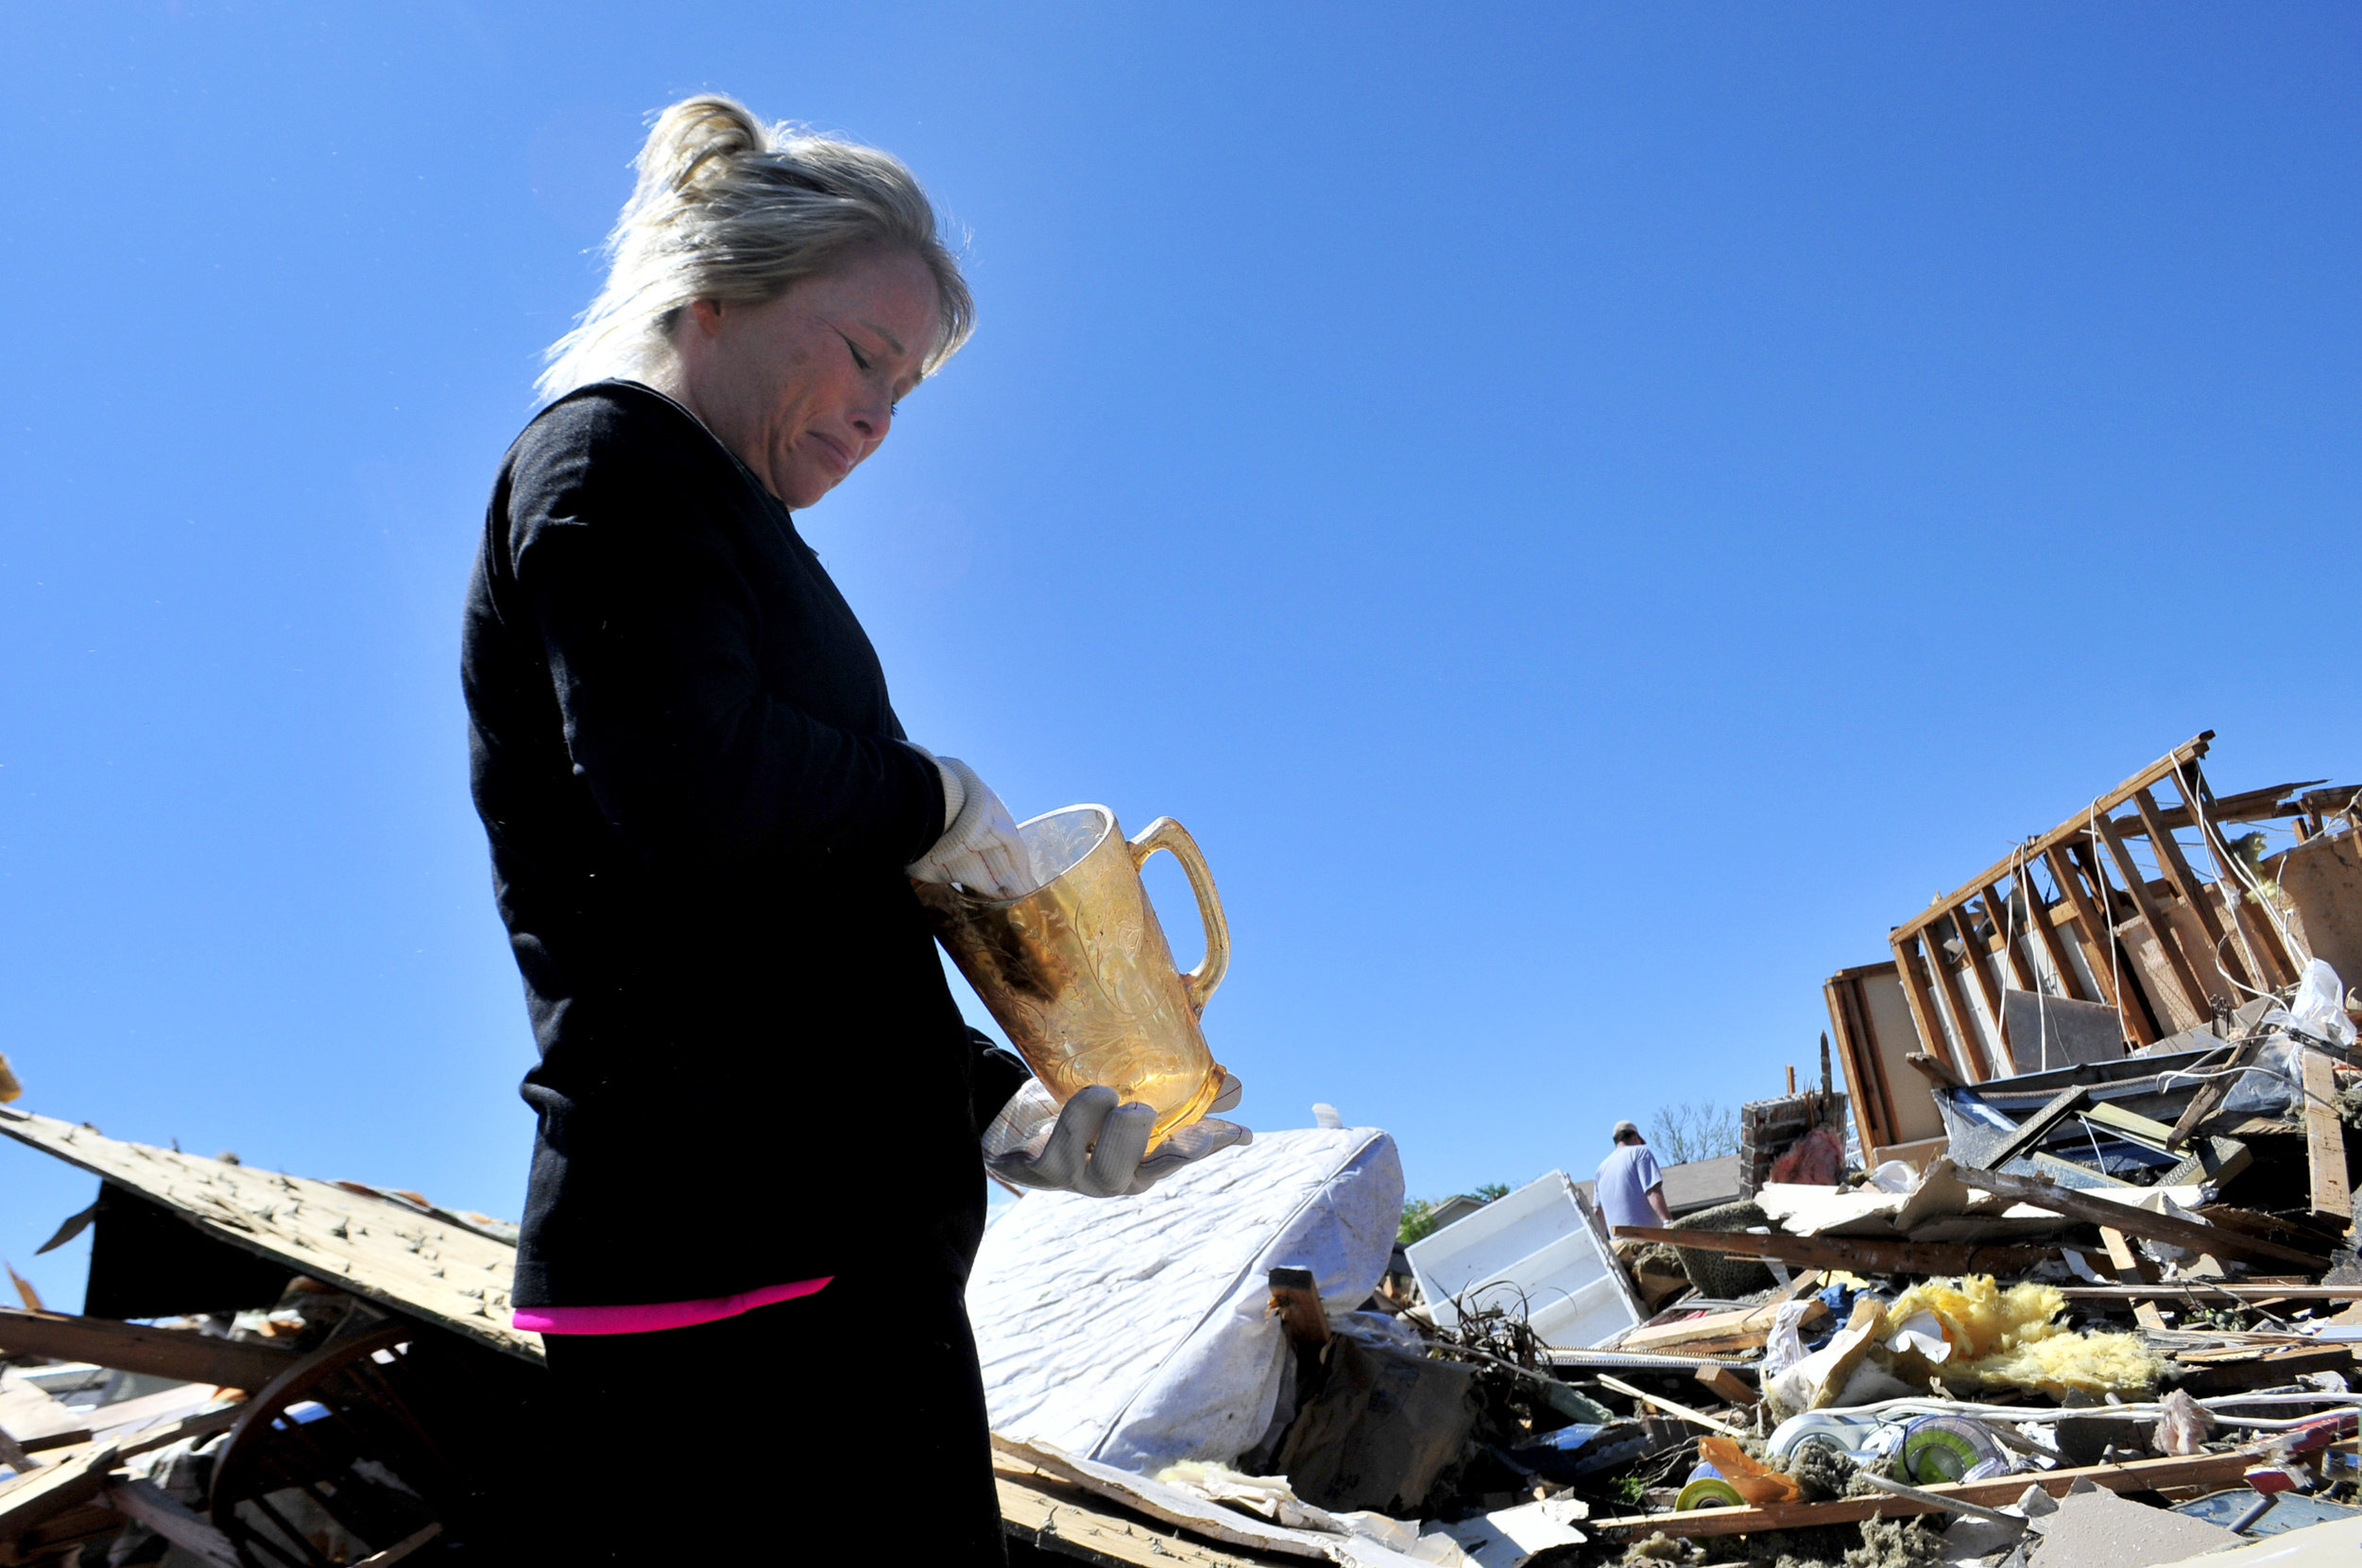  Emilee Neagle got emotional after finding her grandmothers pitcher in what was left behind of her home that was destroyed by a tornado that ripped through Woodward Oklahoma early Sunday morning.  